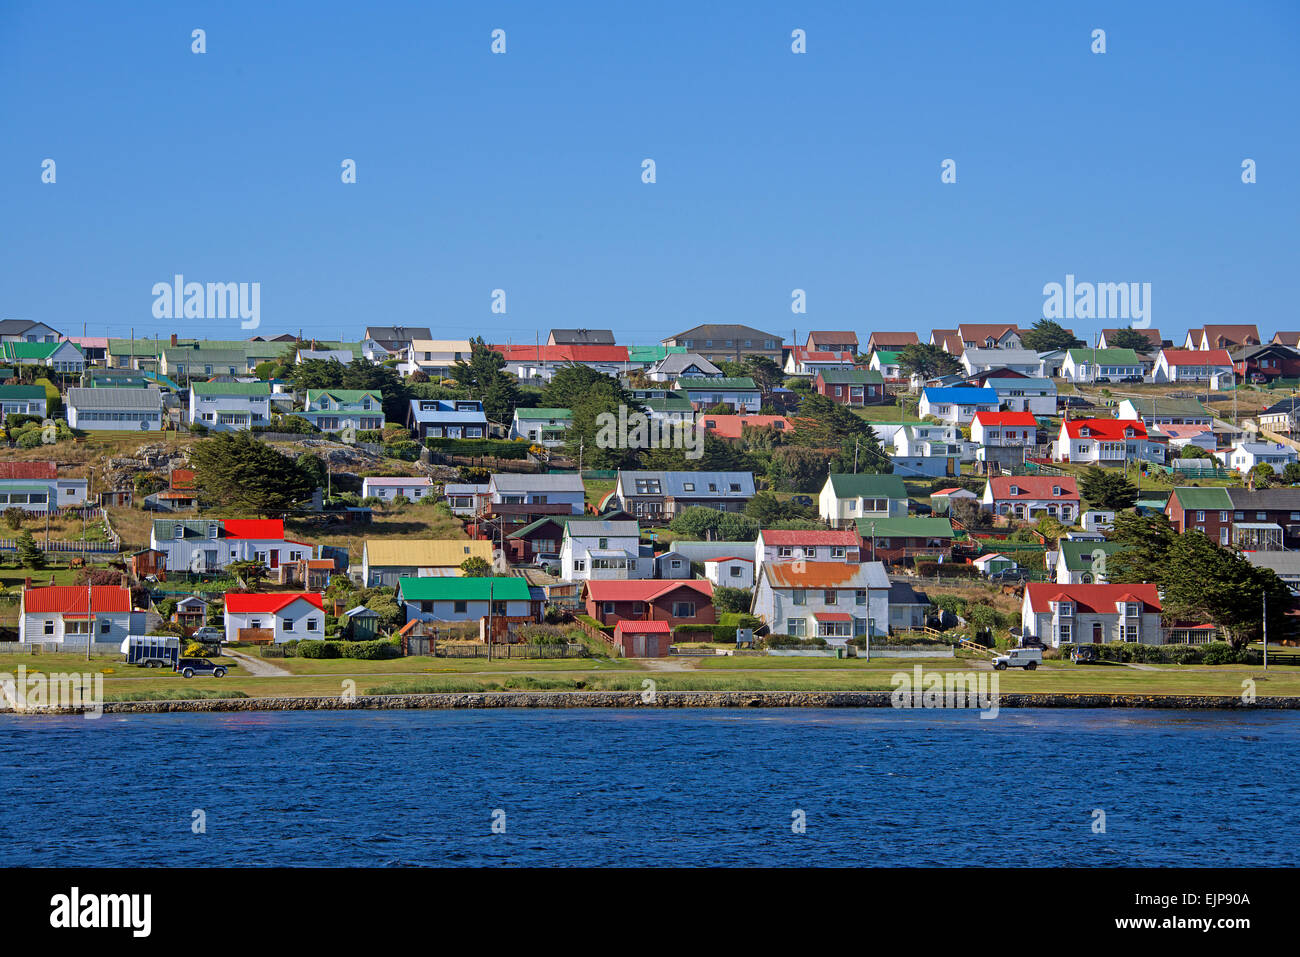 Colourful waterfront houses Port Stanley Falkland Islands Stock Photo